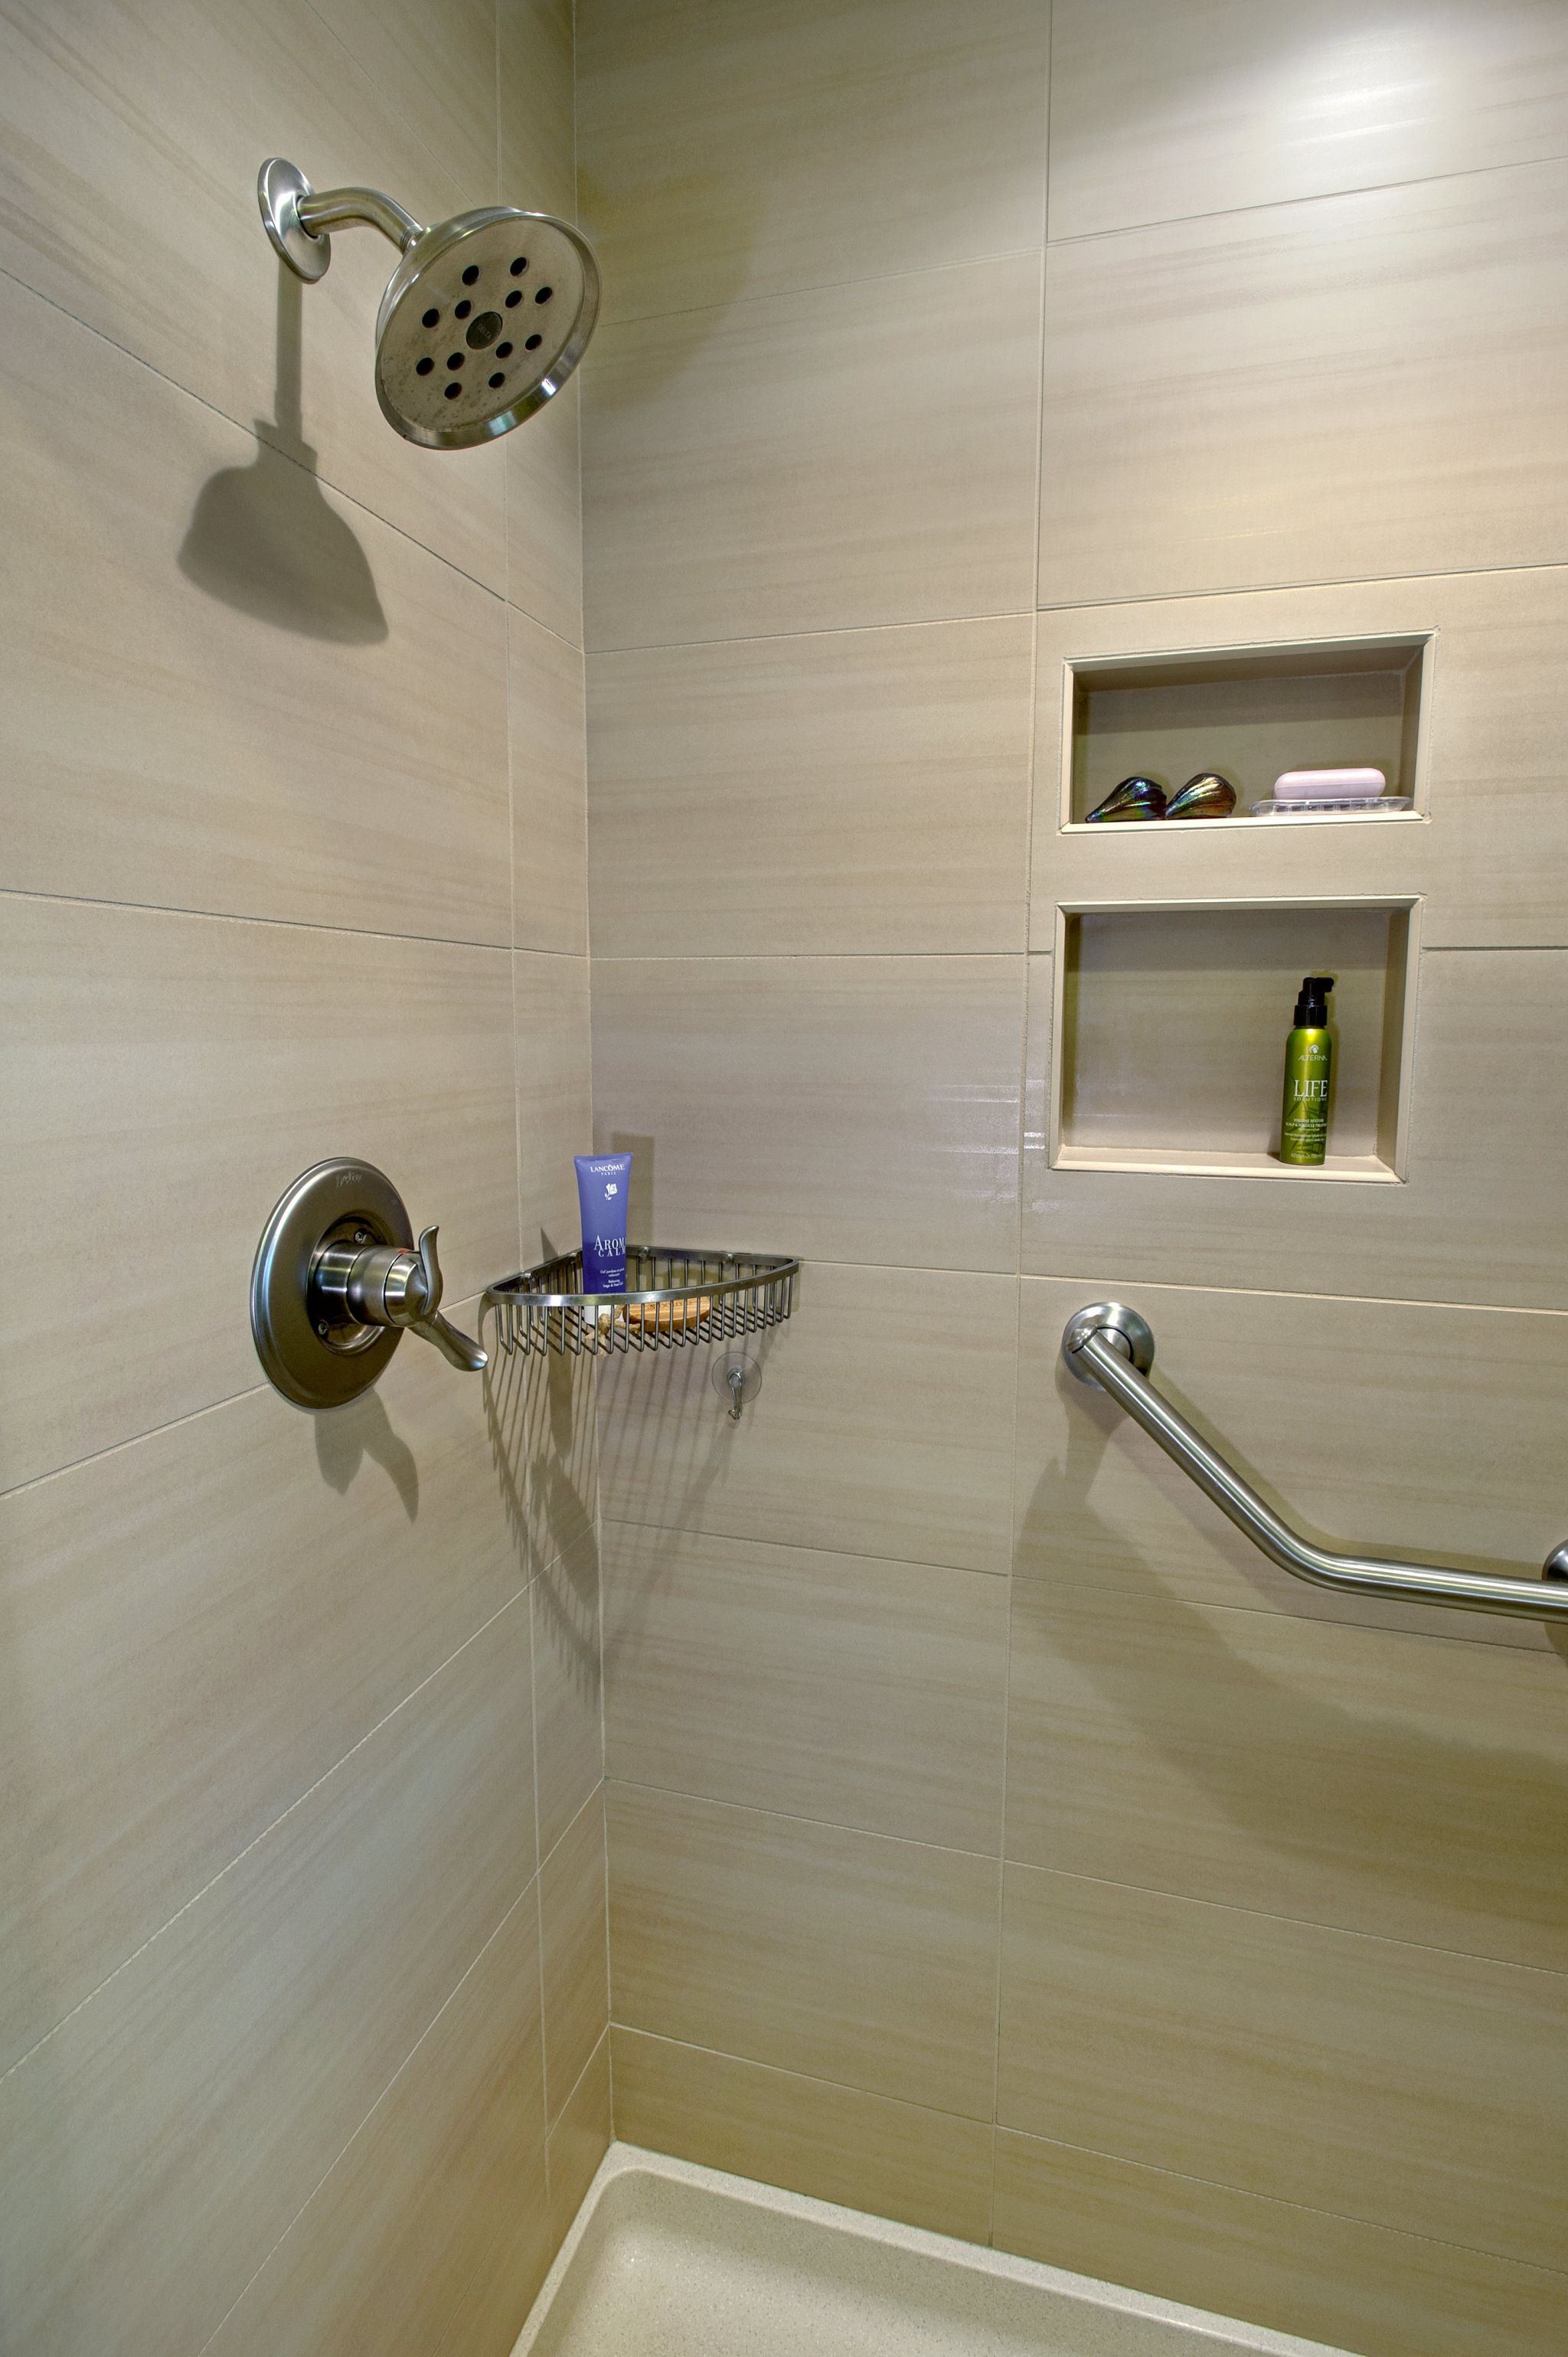 Shower with a small, silver storage basket mounted in the front right corner